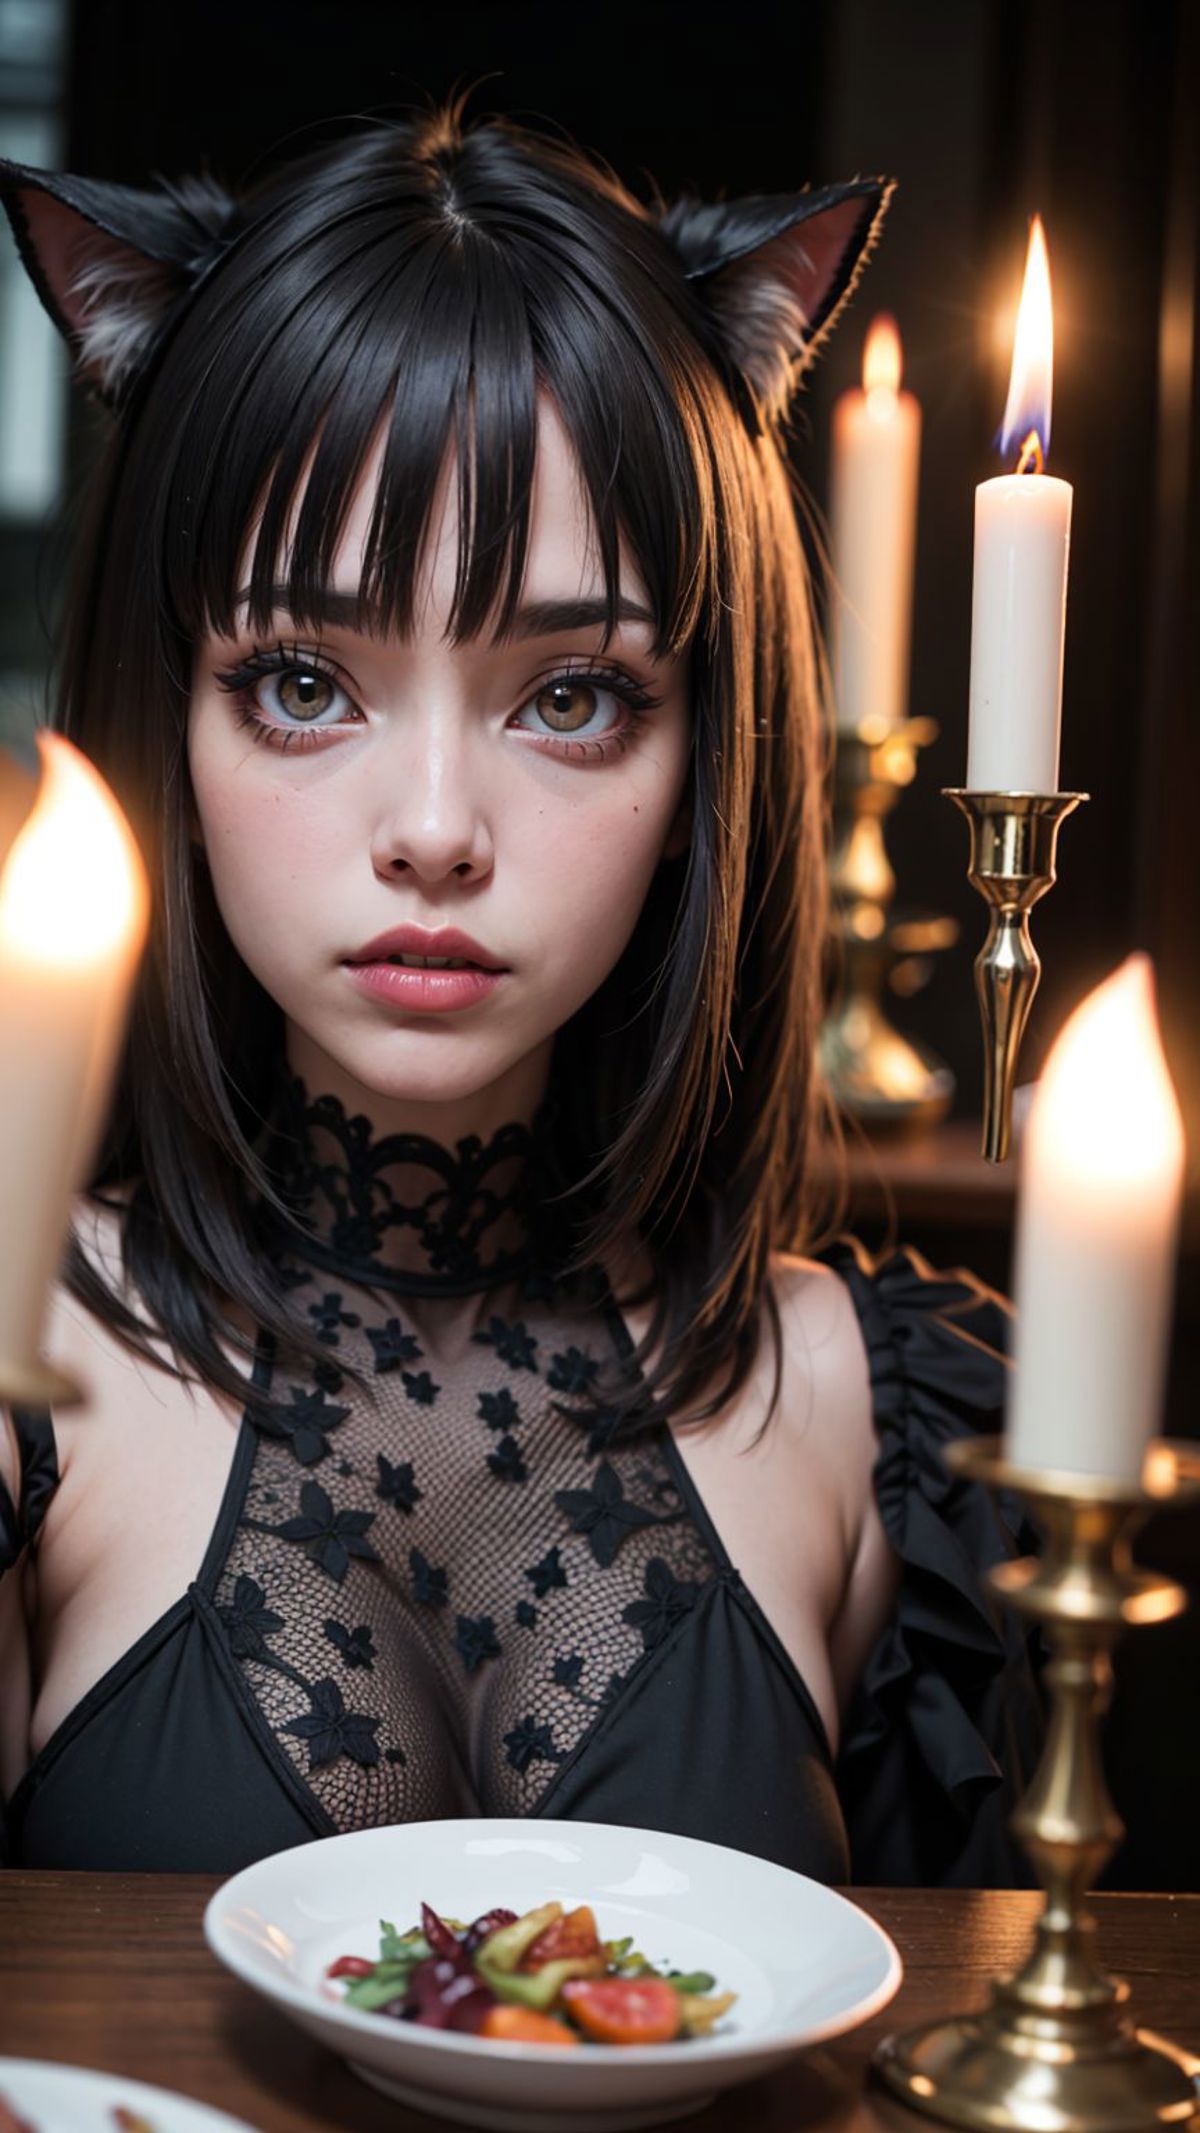 A young woman with long black hair and a black lace top stands in front of a background of lit candles. The image captures her gaze and features the close-up of her face and upper body.